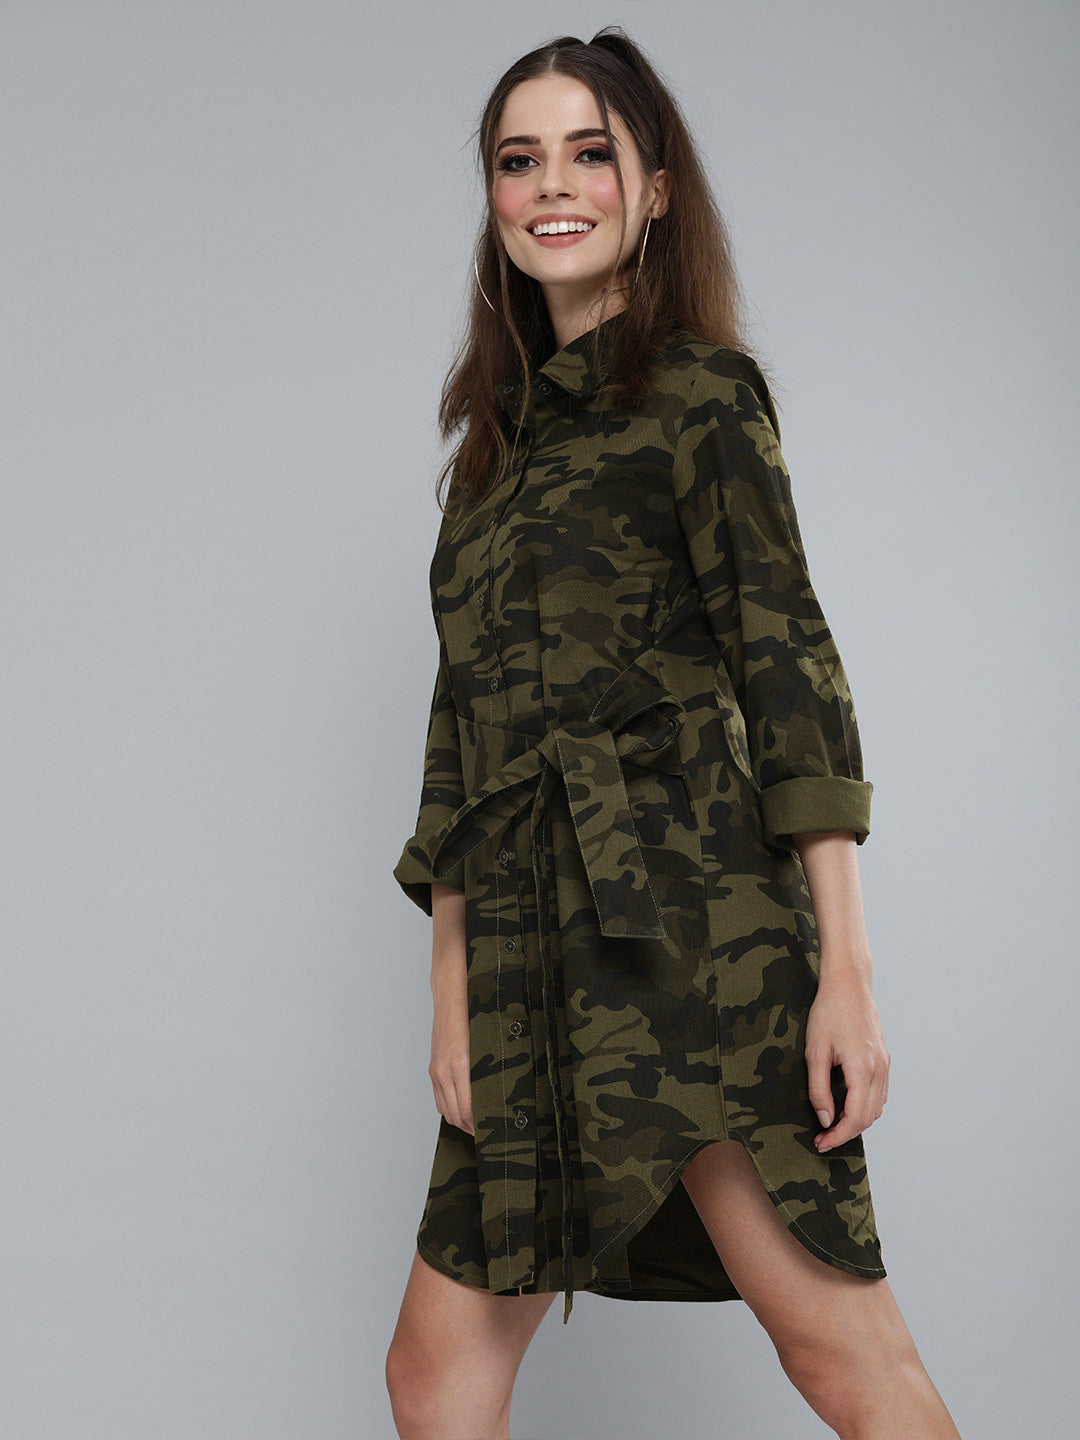 Camo Clothing, Camouflage Dresses & Outfits